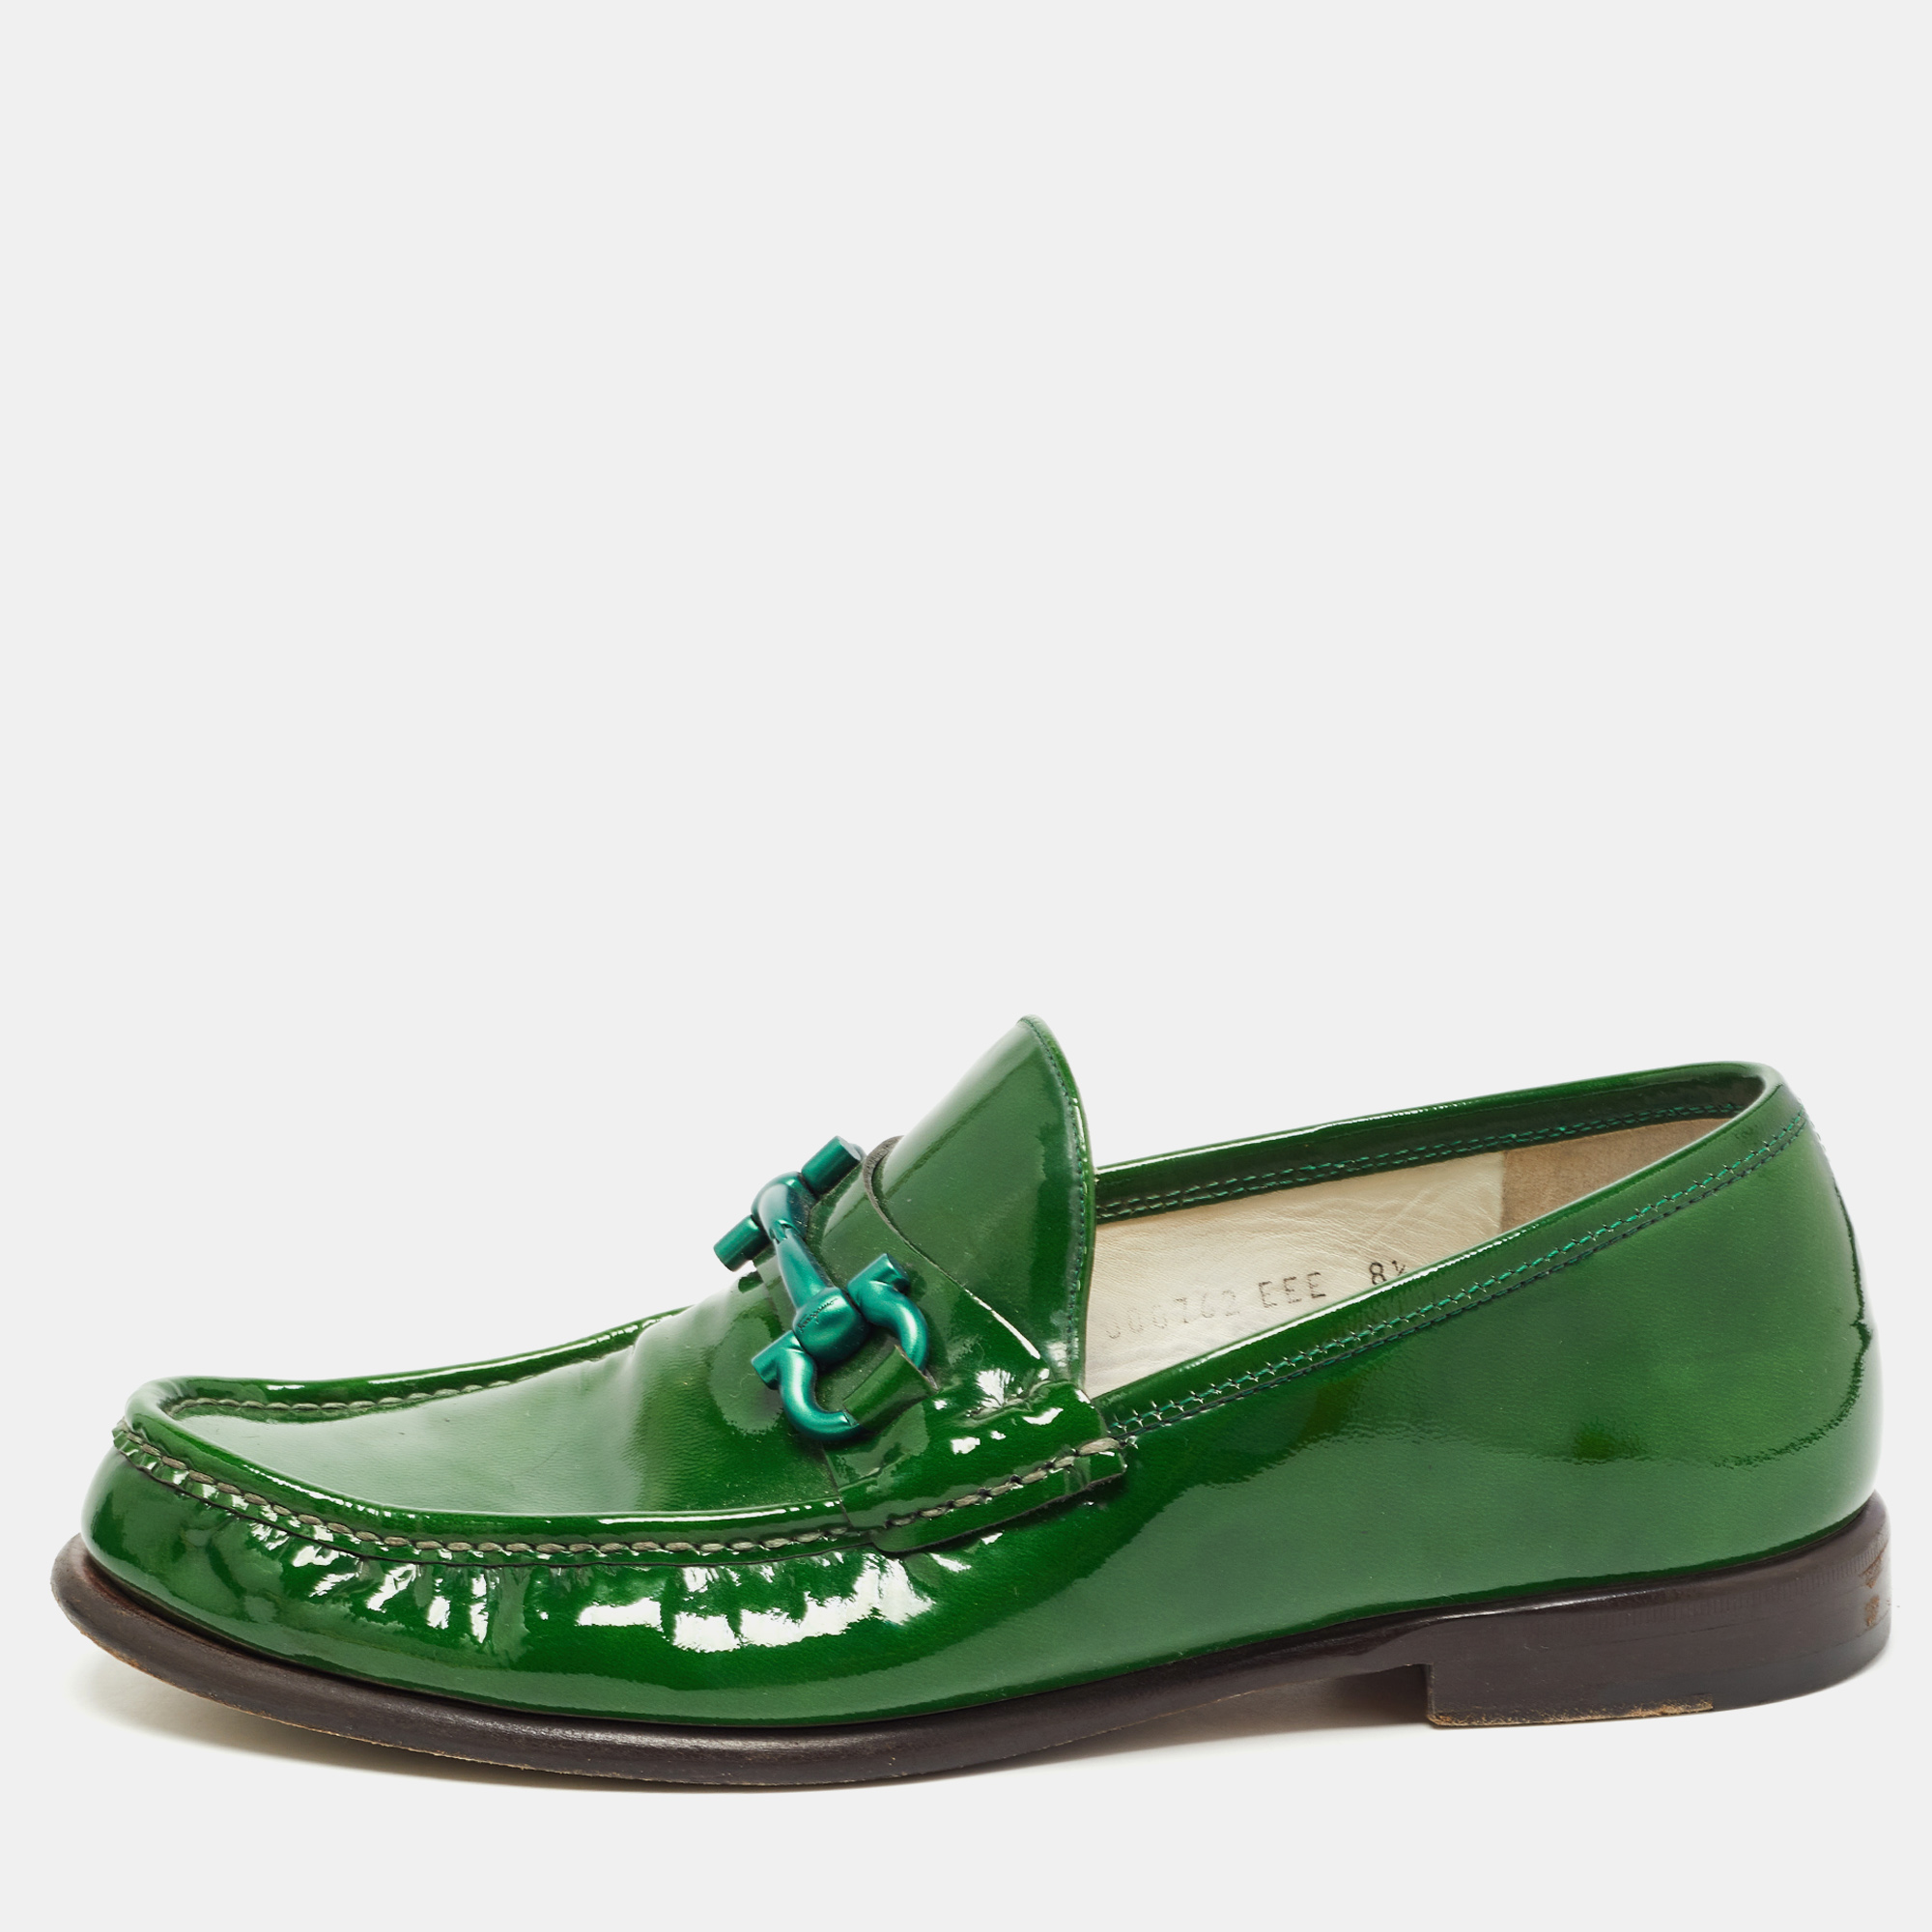 Pre-owned Ferragamo Green Patent Leather Mason Loafers Size 42.5